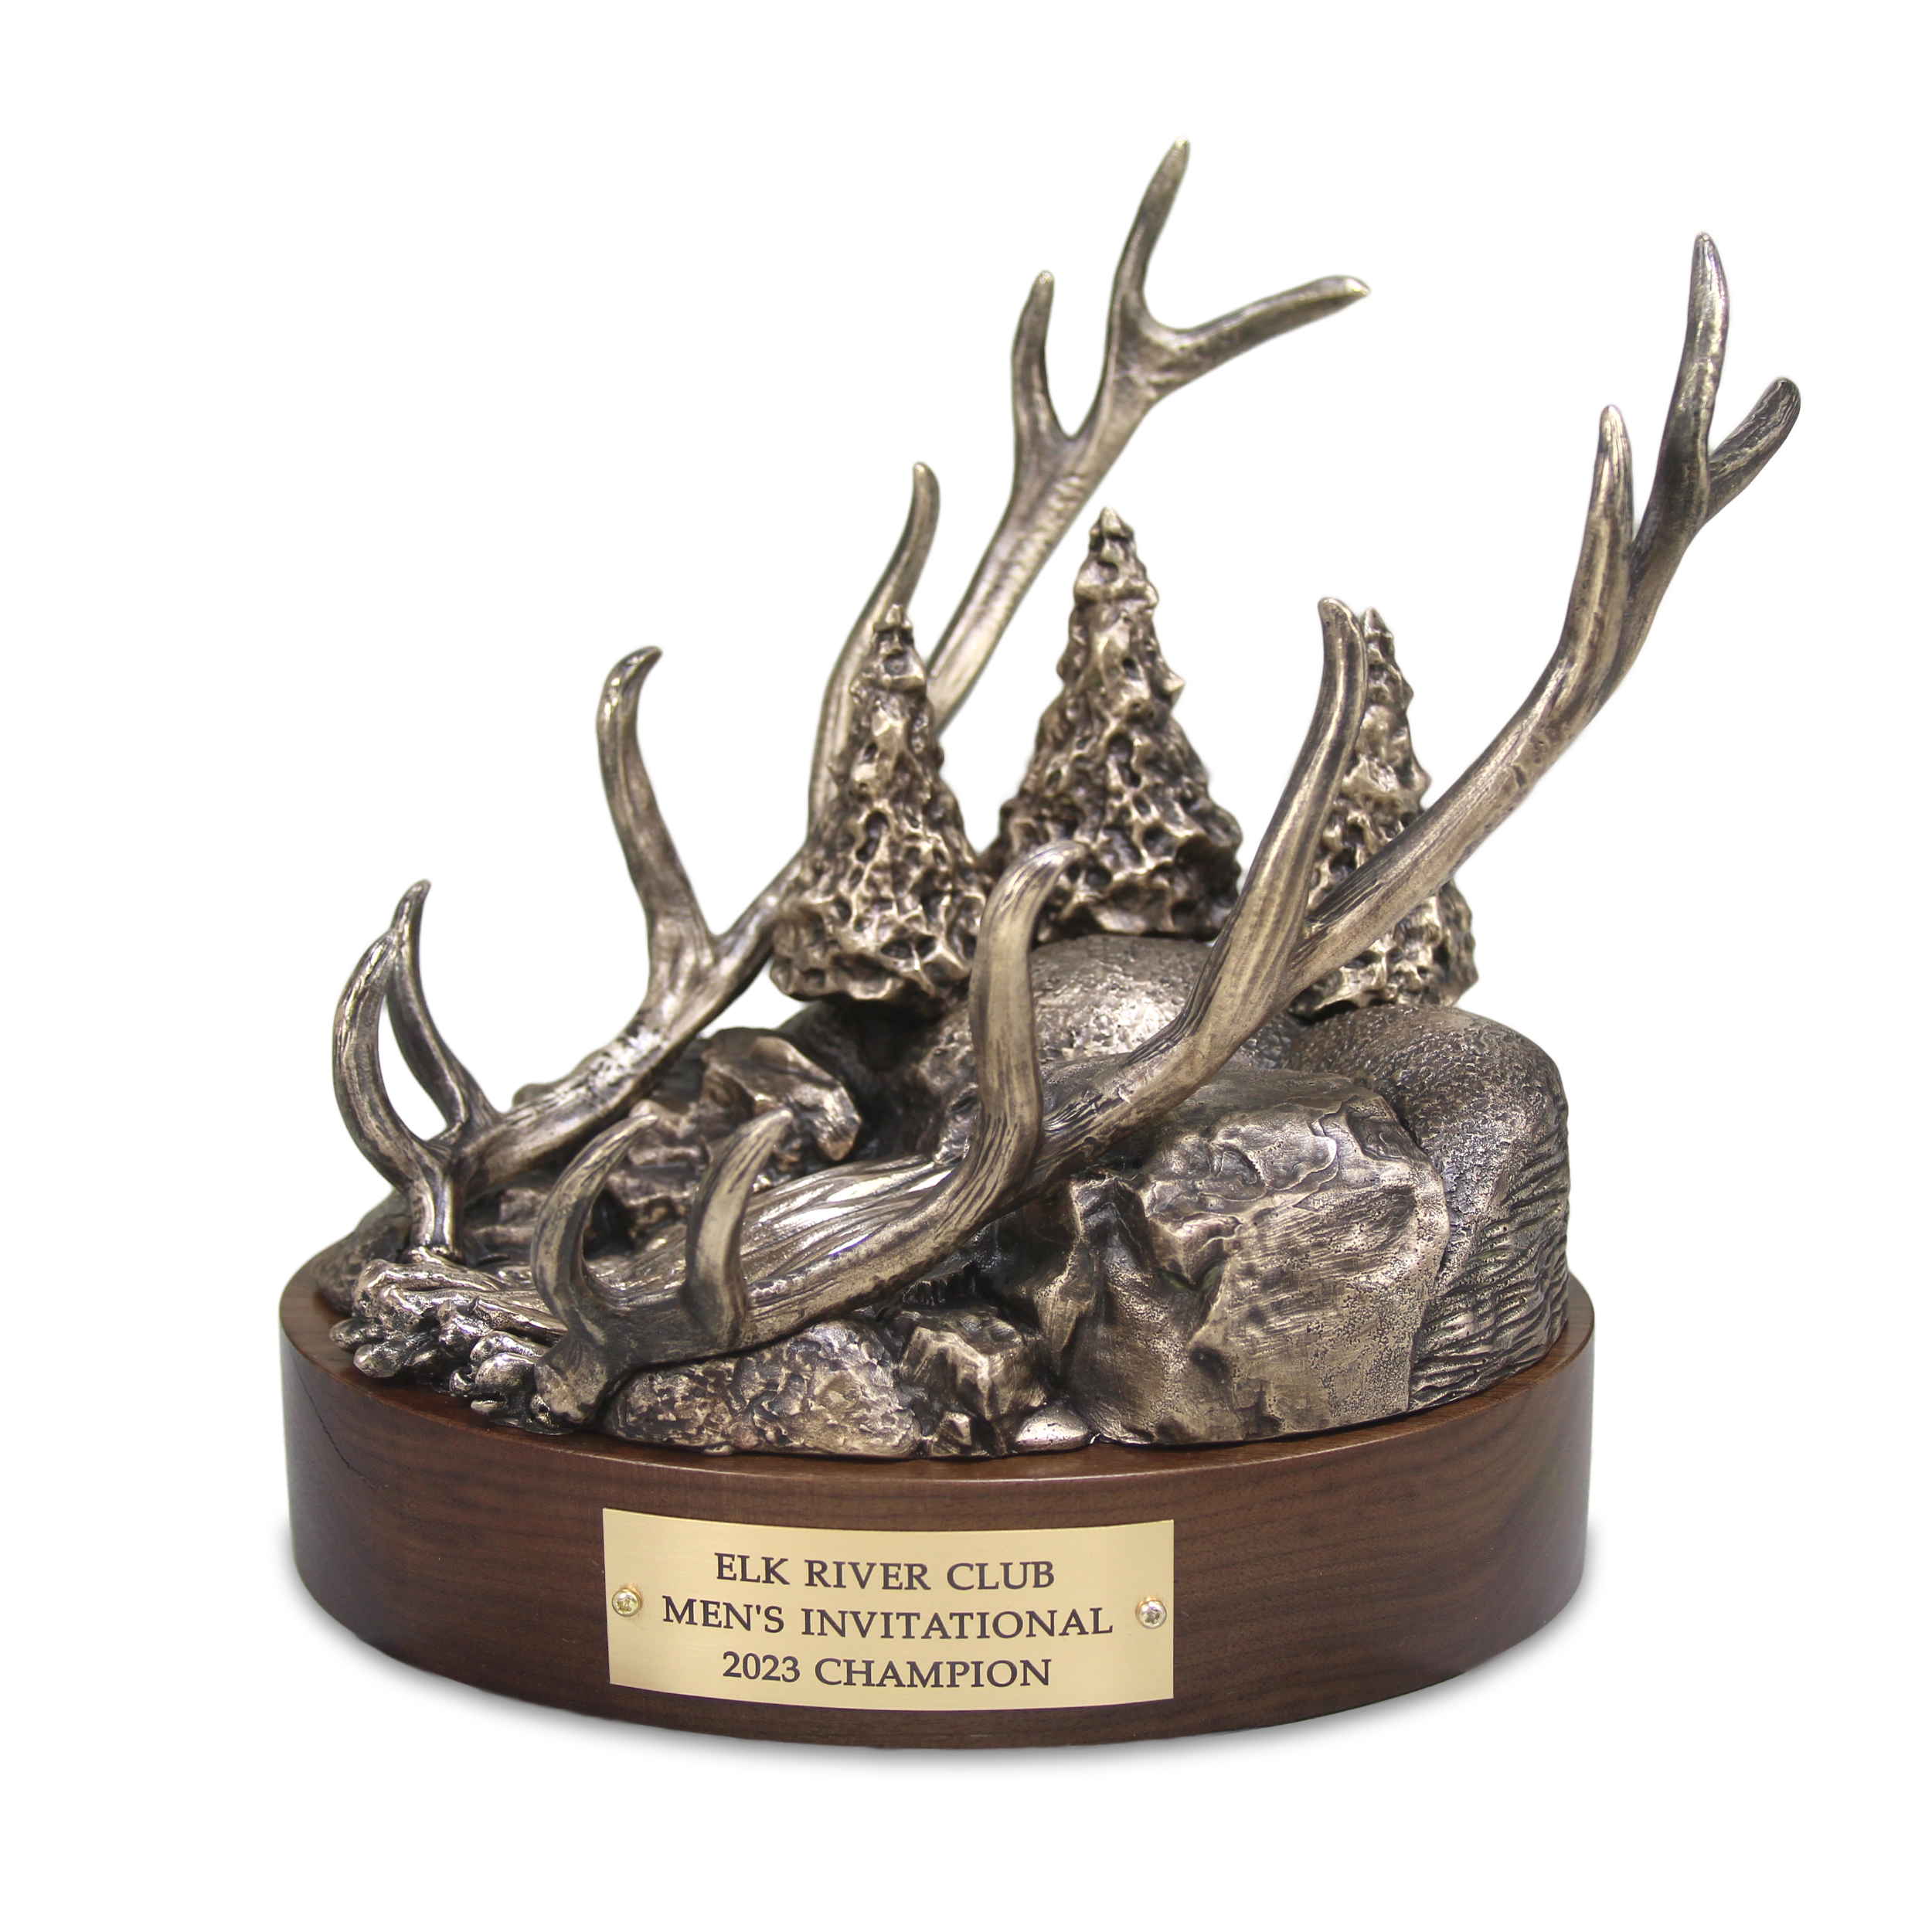 Elk River Club Trophy made by Malcolm DeMille